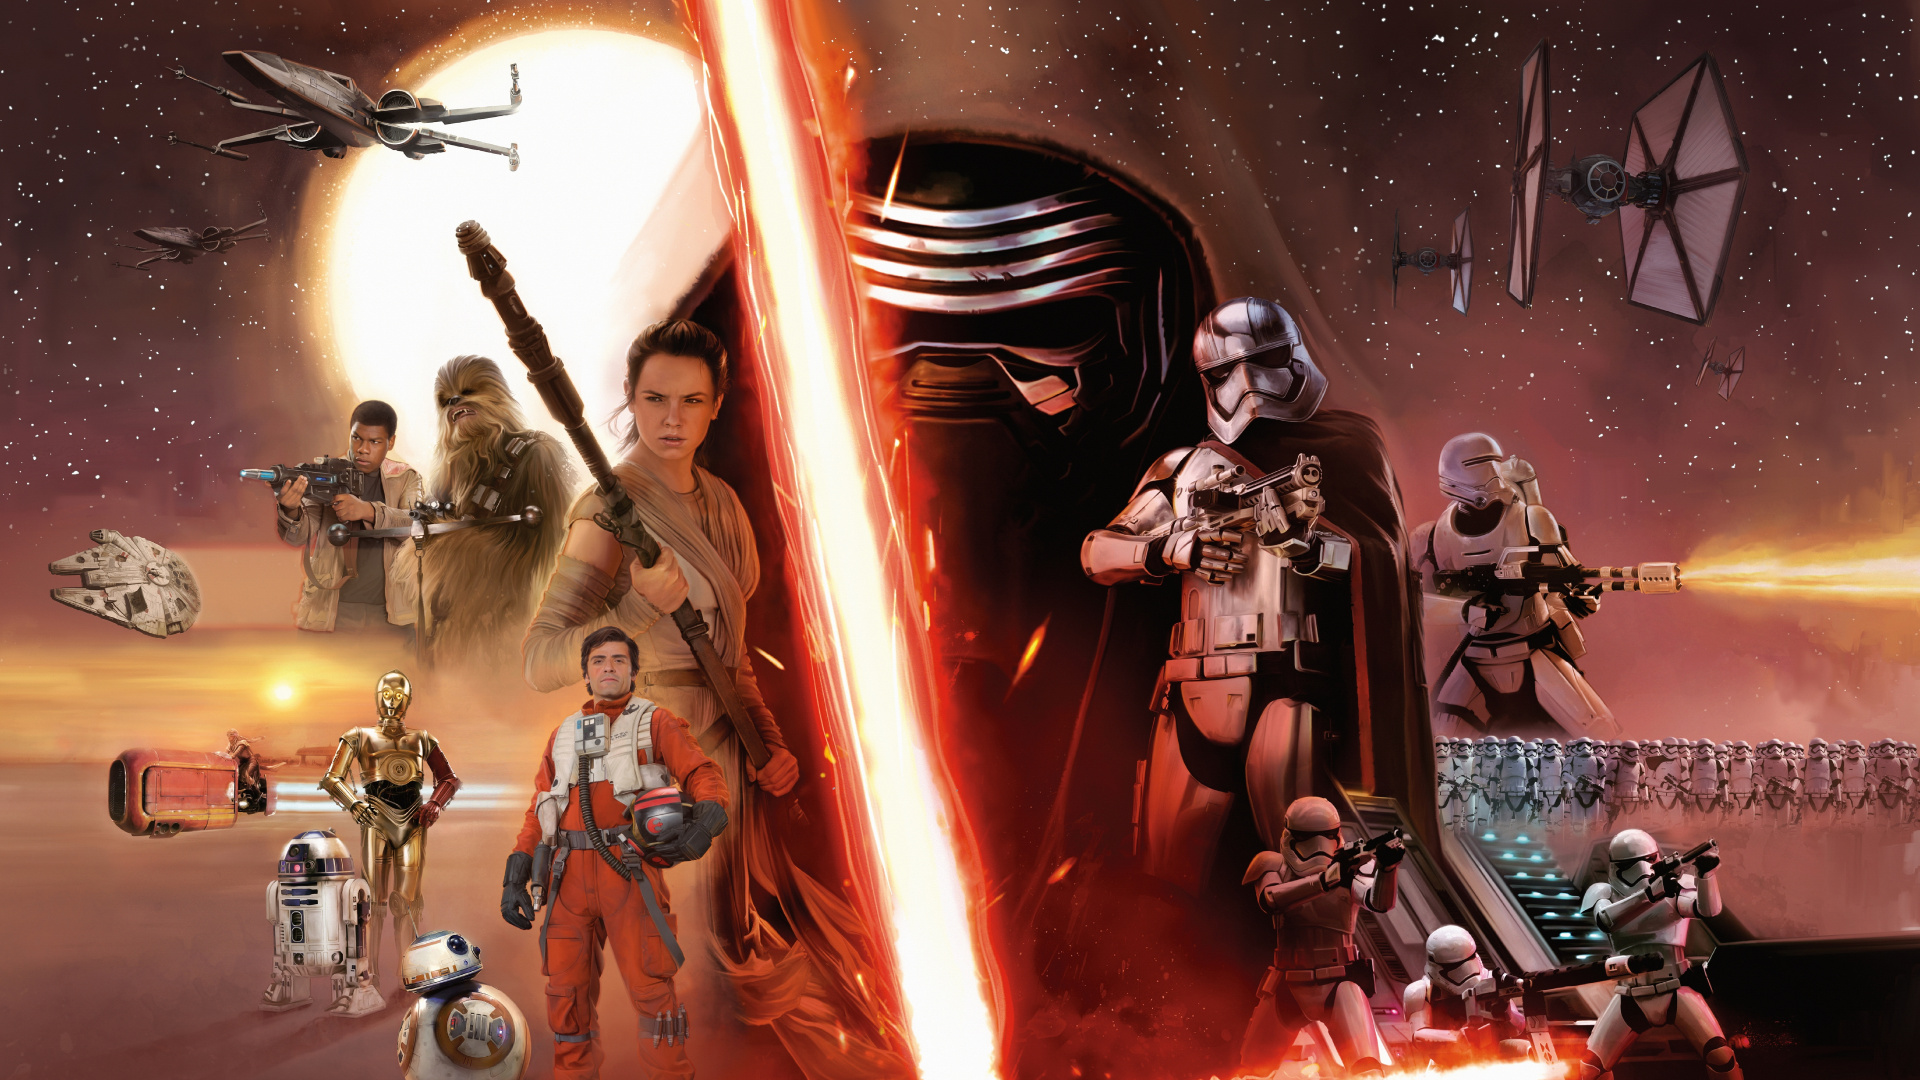 Star Wars The Force Awakens, Star Wars, Action Figure, Lucasfilm, Space. Wallpaper in 1920x1080 Resolution